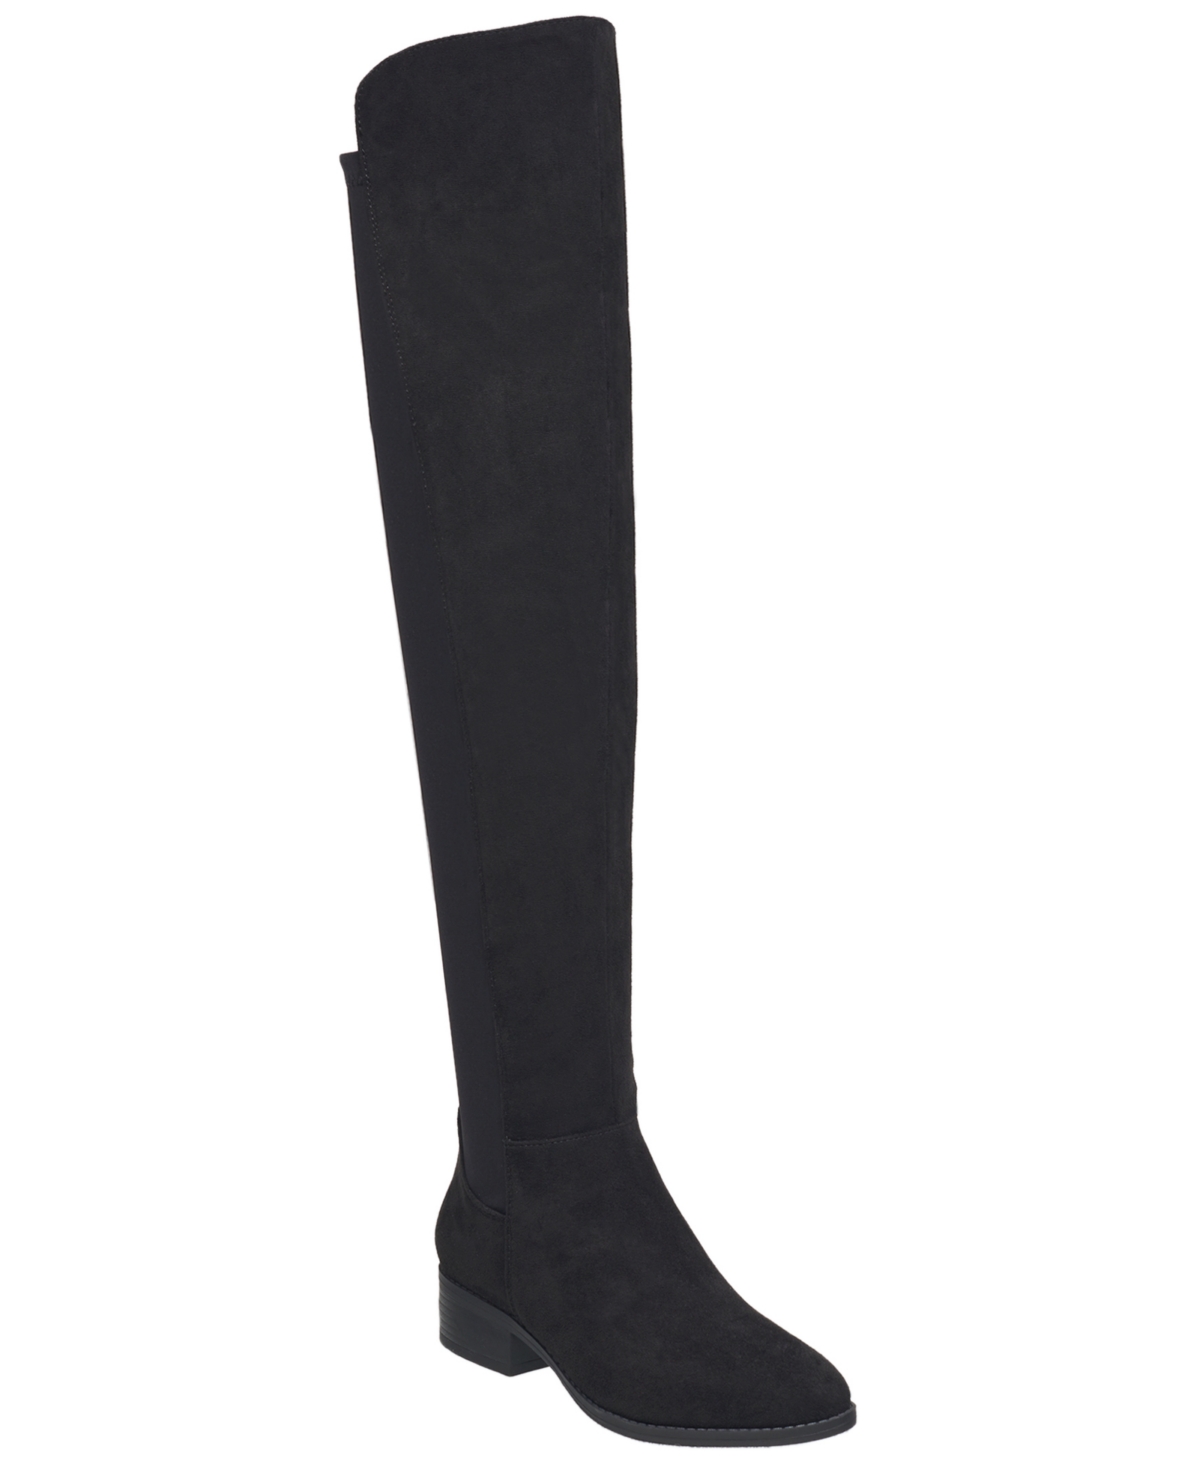 Women's Emma Faux Leather High Boots - Black